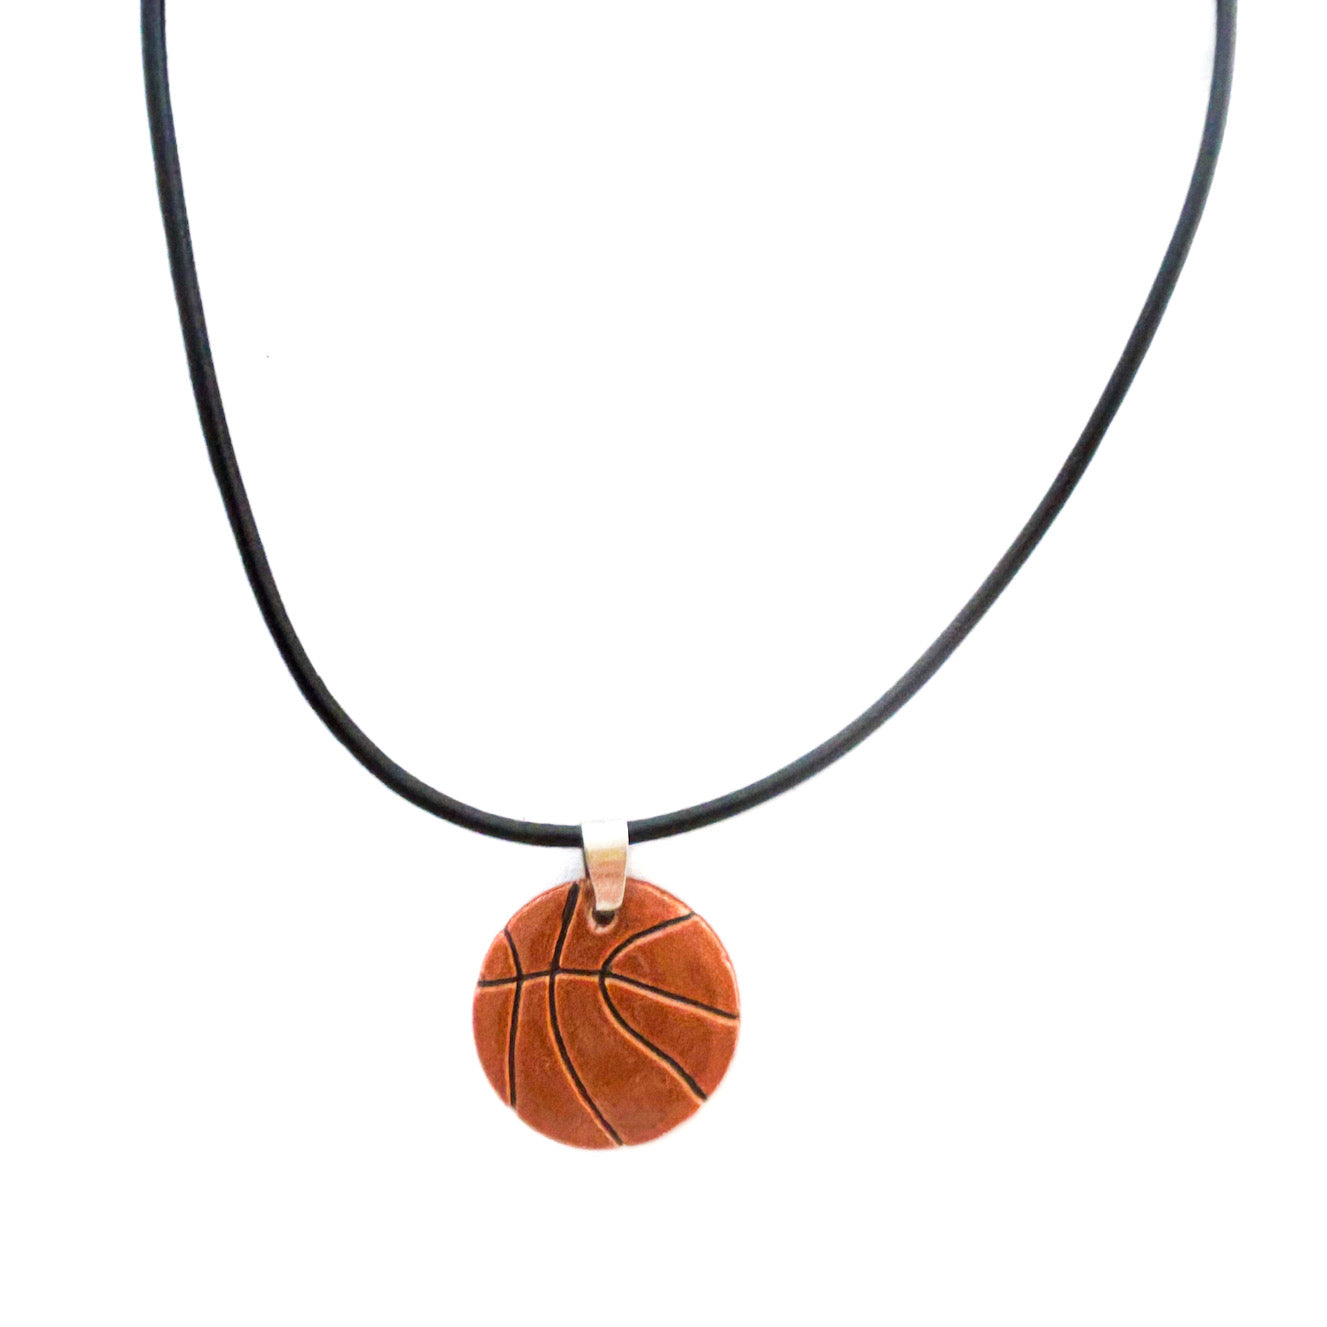 Basketball Necklace | Stainless Steel Basketball Pendant Charm Chain, Black